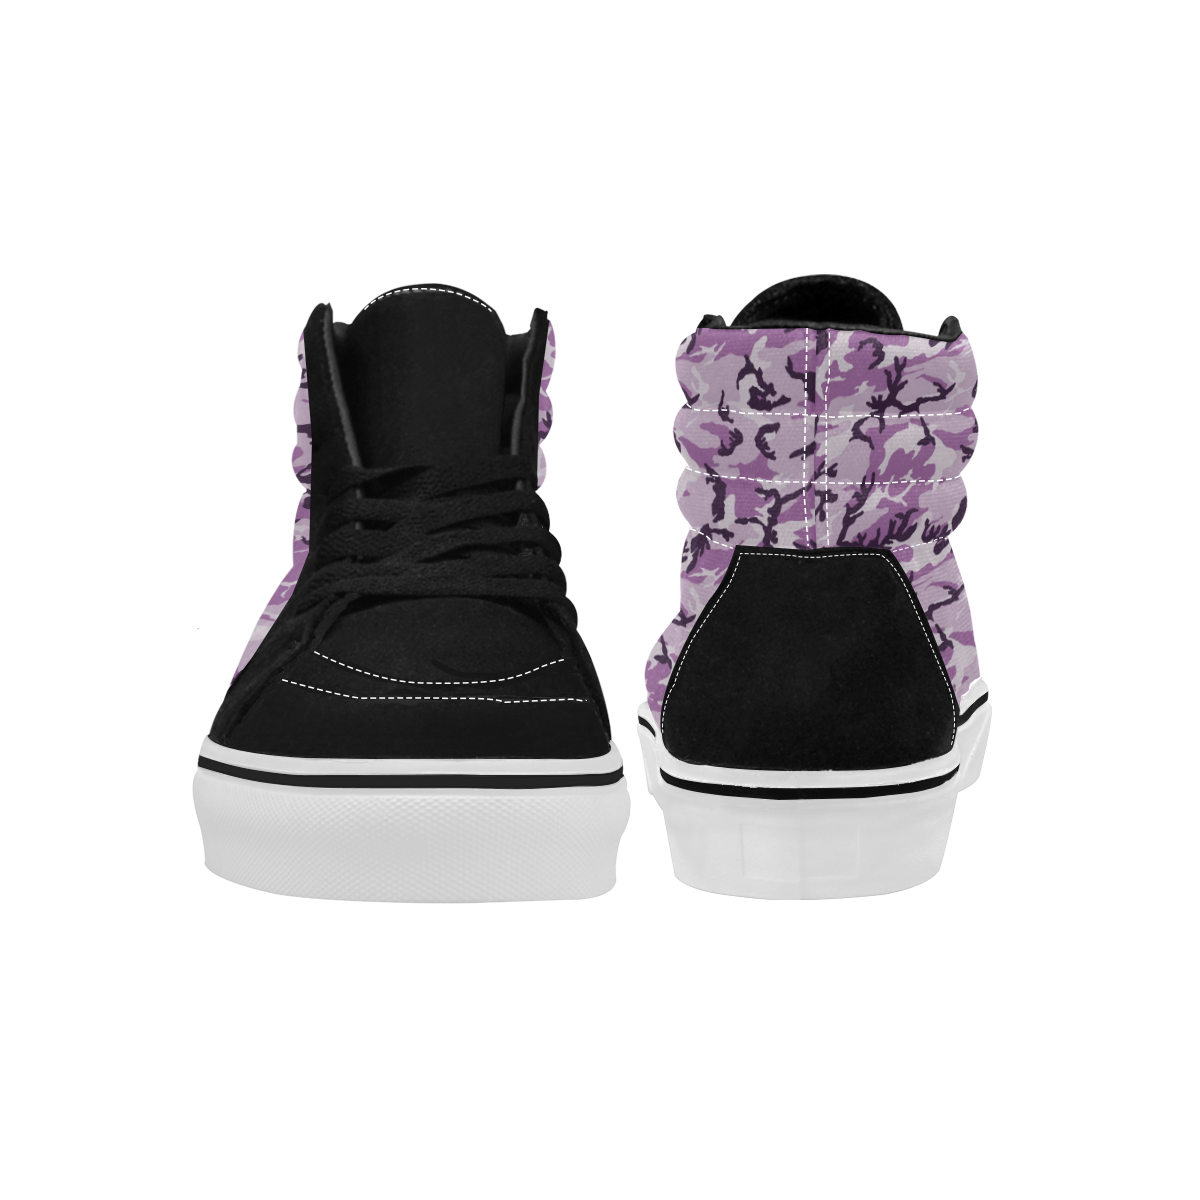 Woodland Pink Purple Camouflage Women's High Top Skateboarding Shoes/Large (Model E001-1)